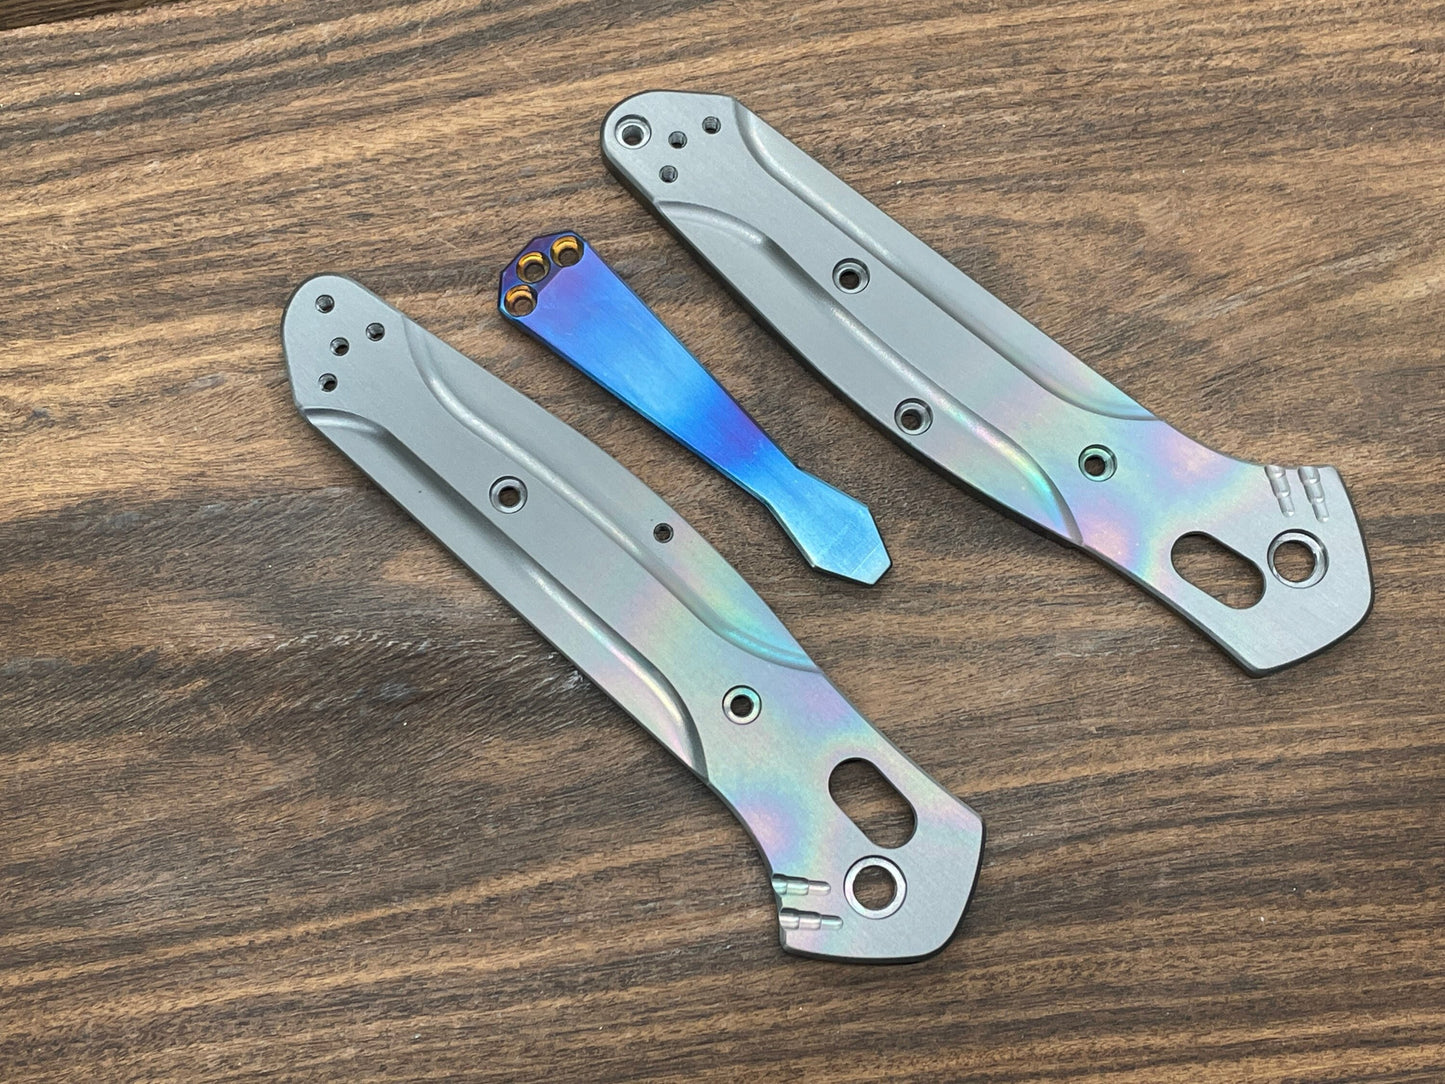 Flamed Dmd Titanium CLIP for most Benchmade models